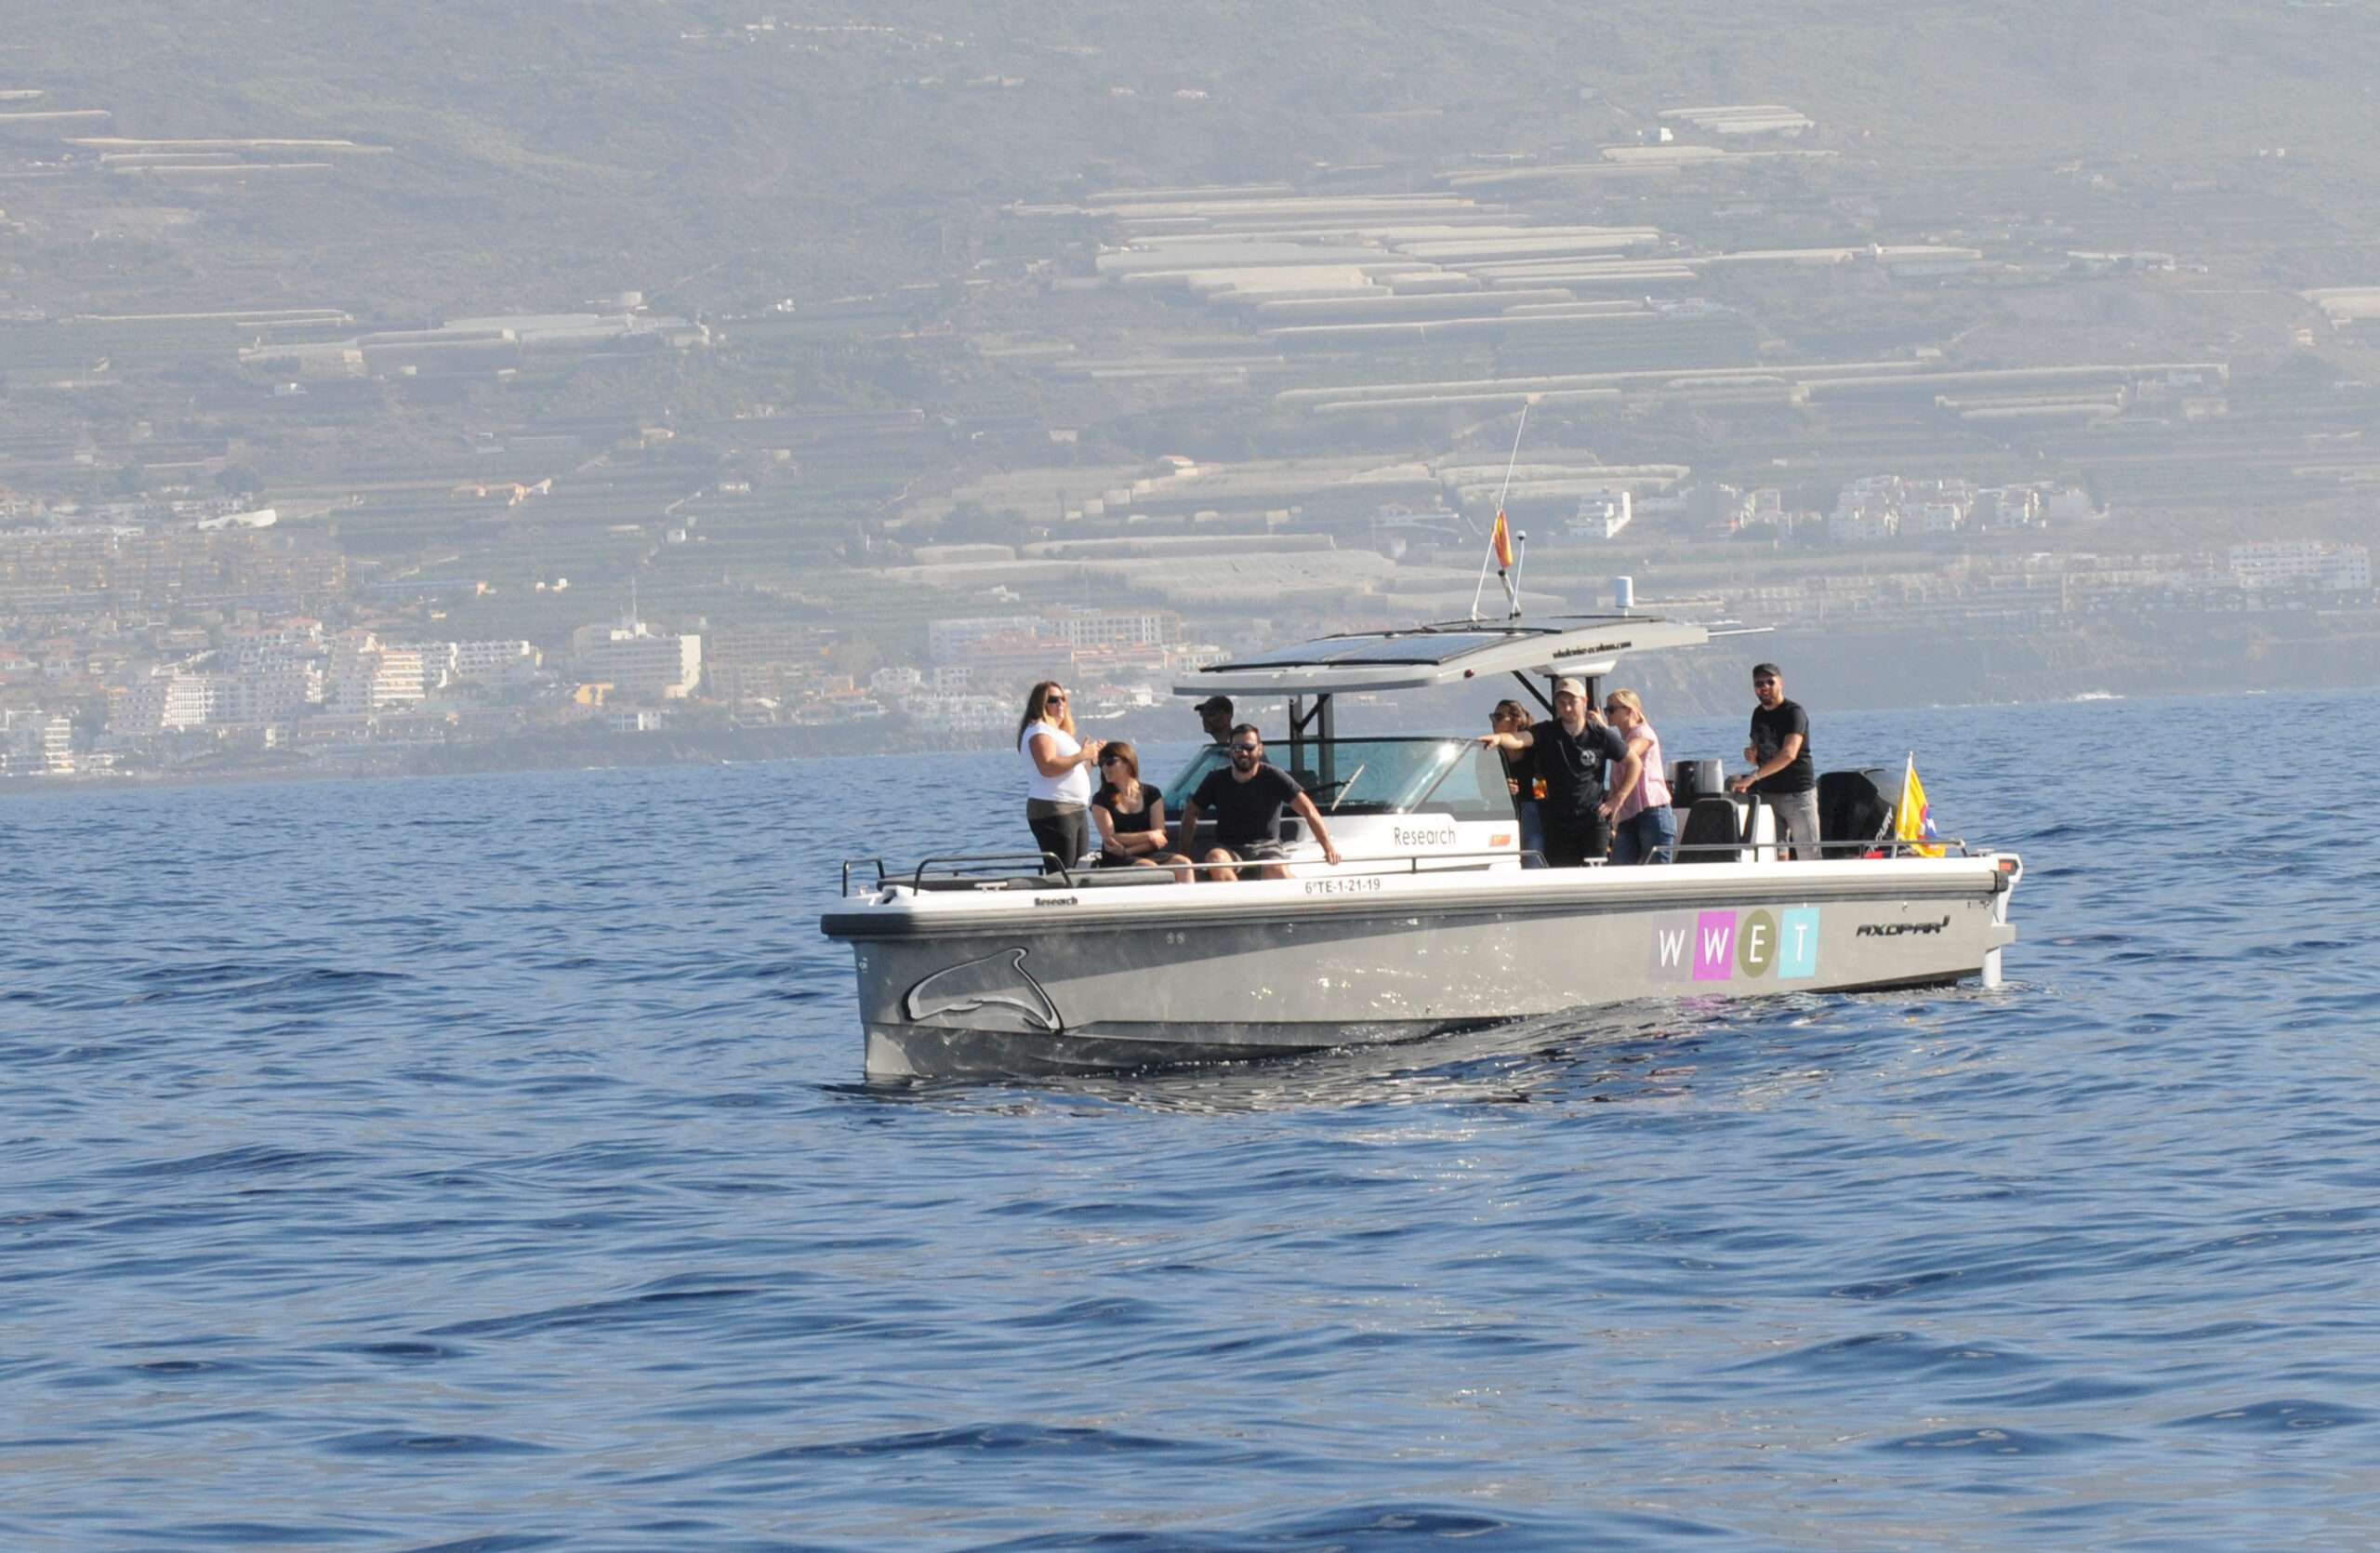 Photograph of the L'Esiel whale and dolphin watching boat in Tenerife